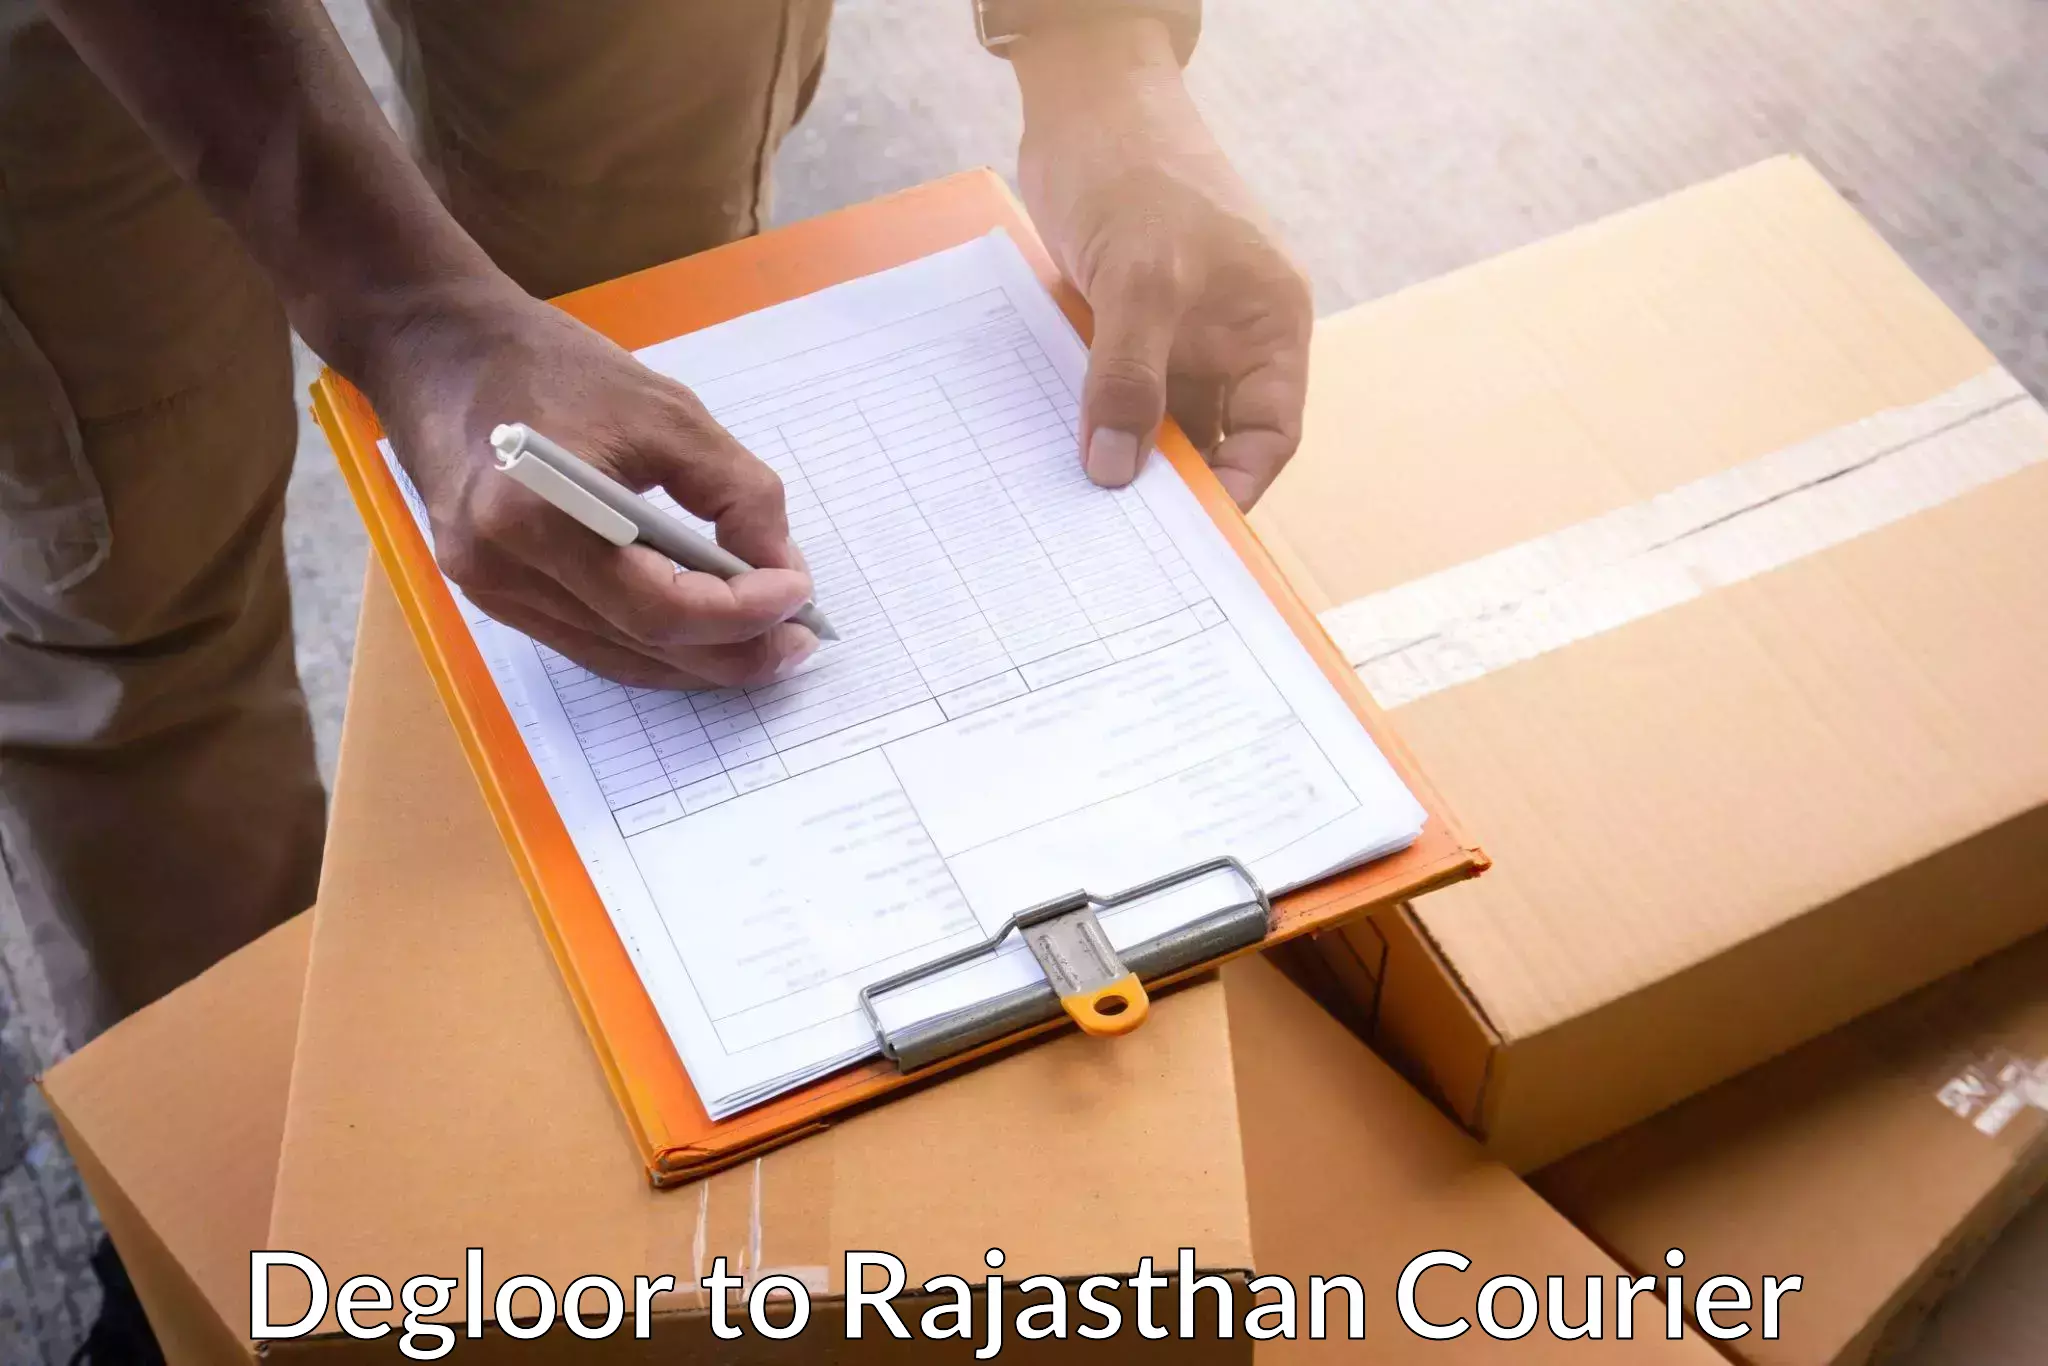 Fragile item shipping Degloor to Rajasthan